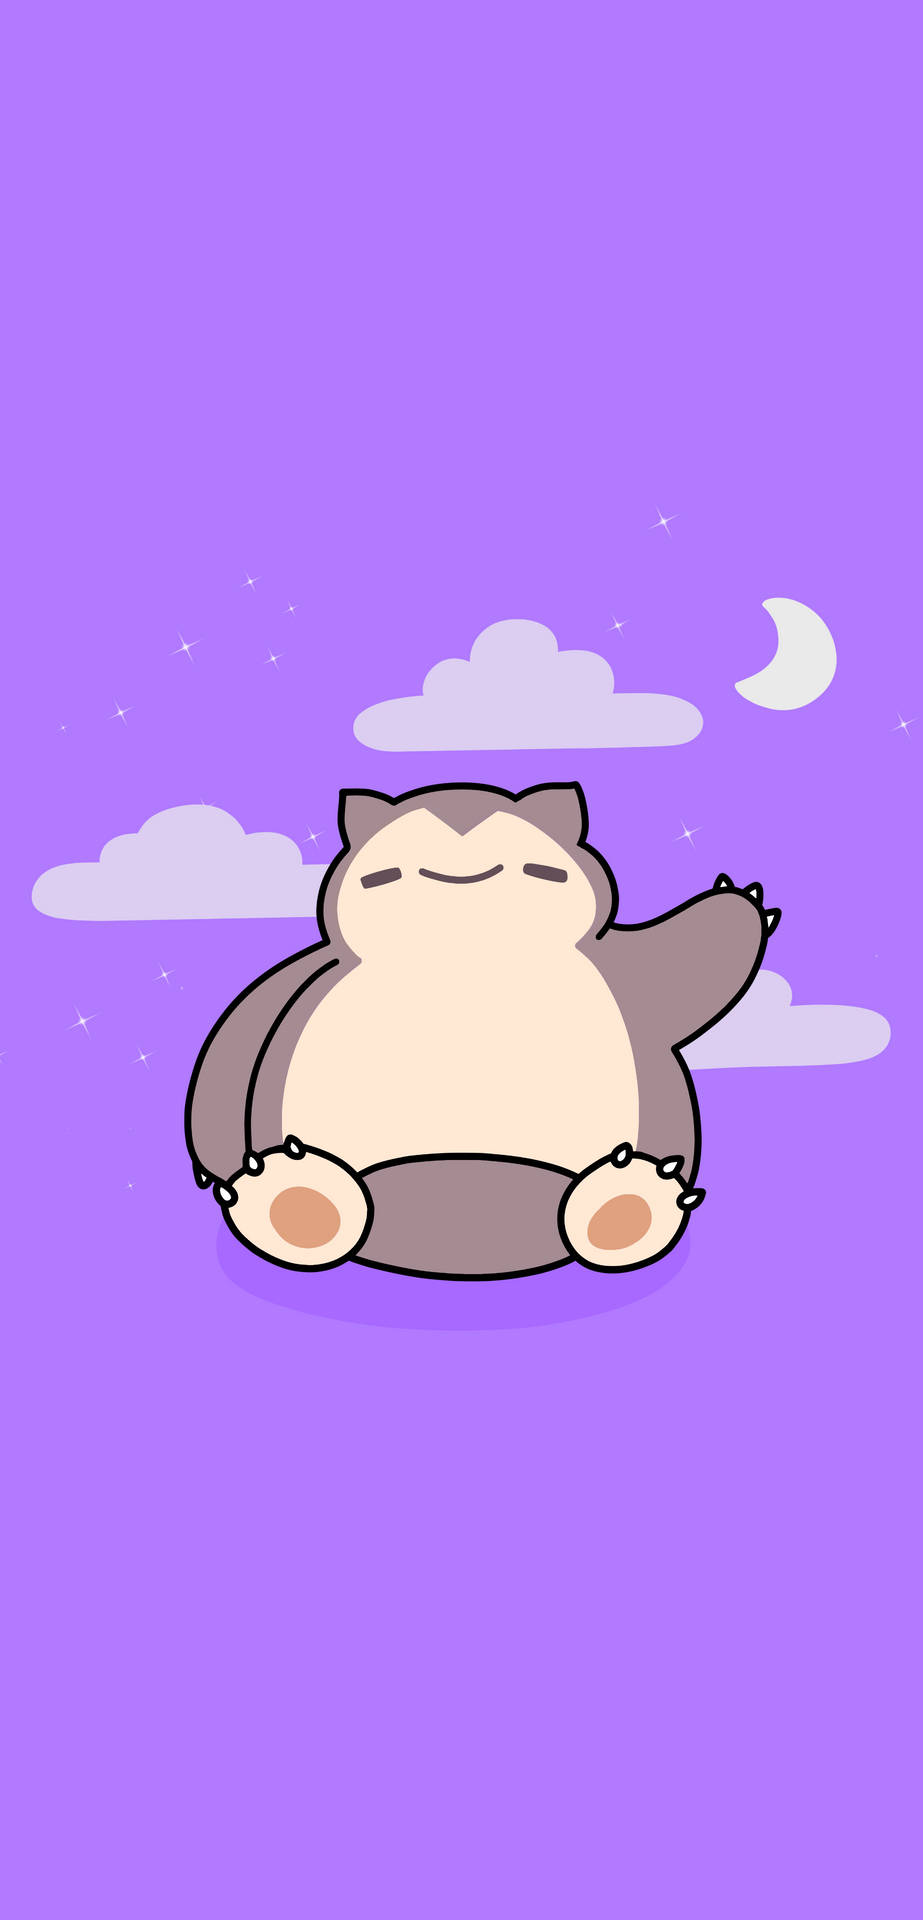 Enjoy The Tranquil Scenery With The Cute And Cuddly Snorlax Background